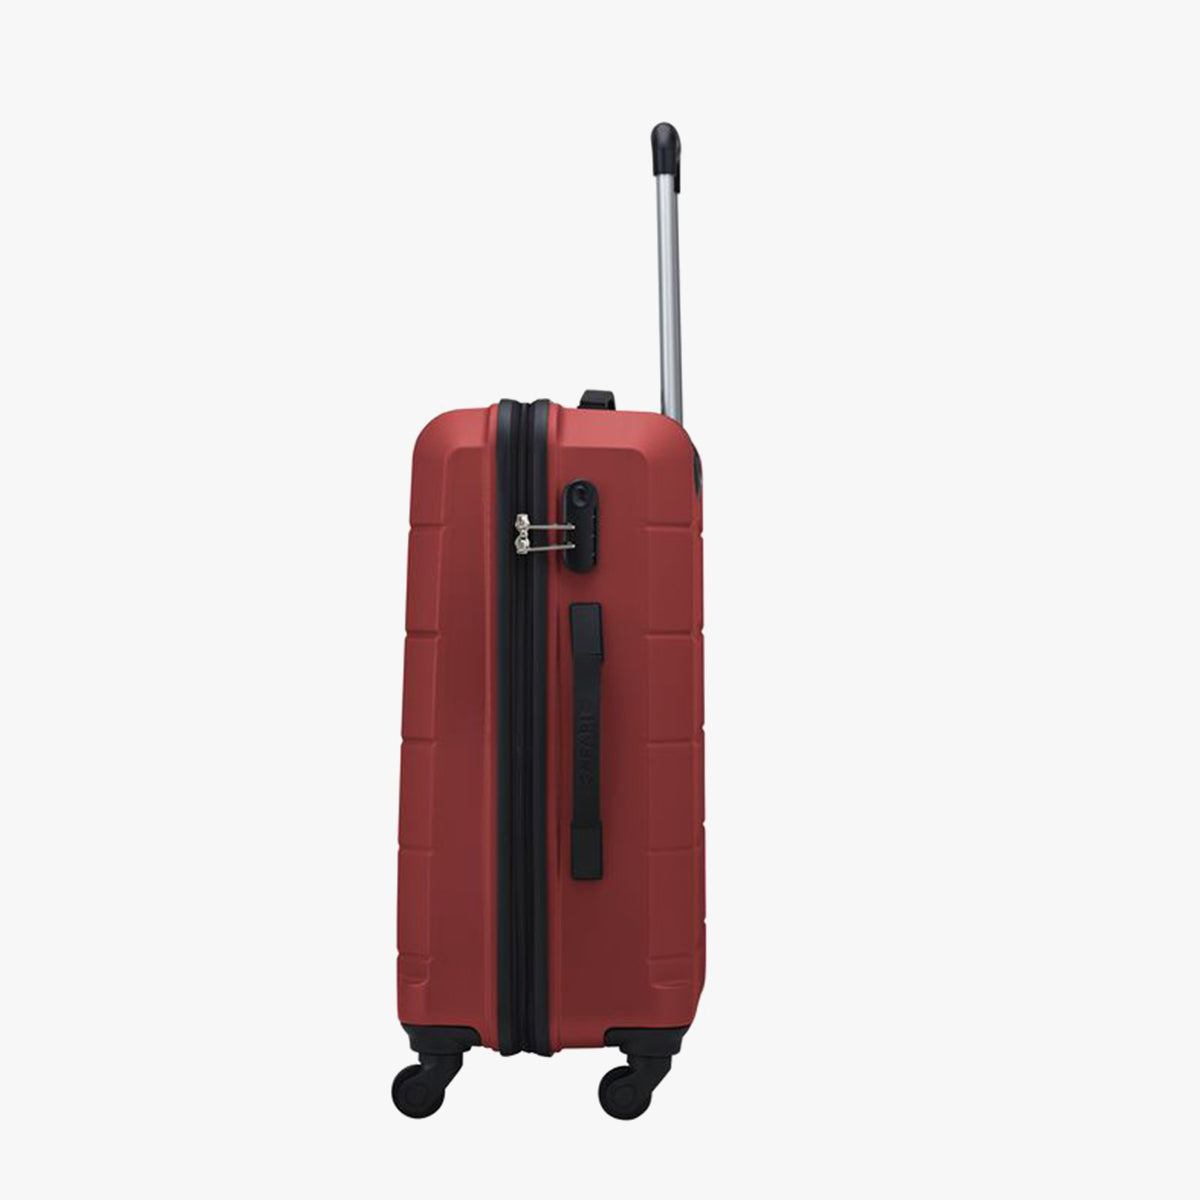 Regloss Antiscratch Hard Luggage - Red